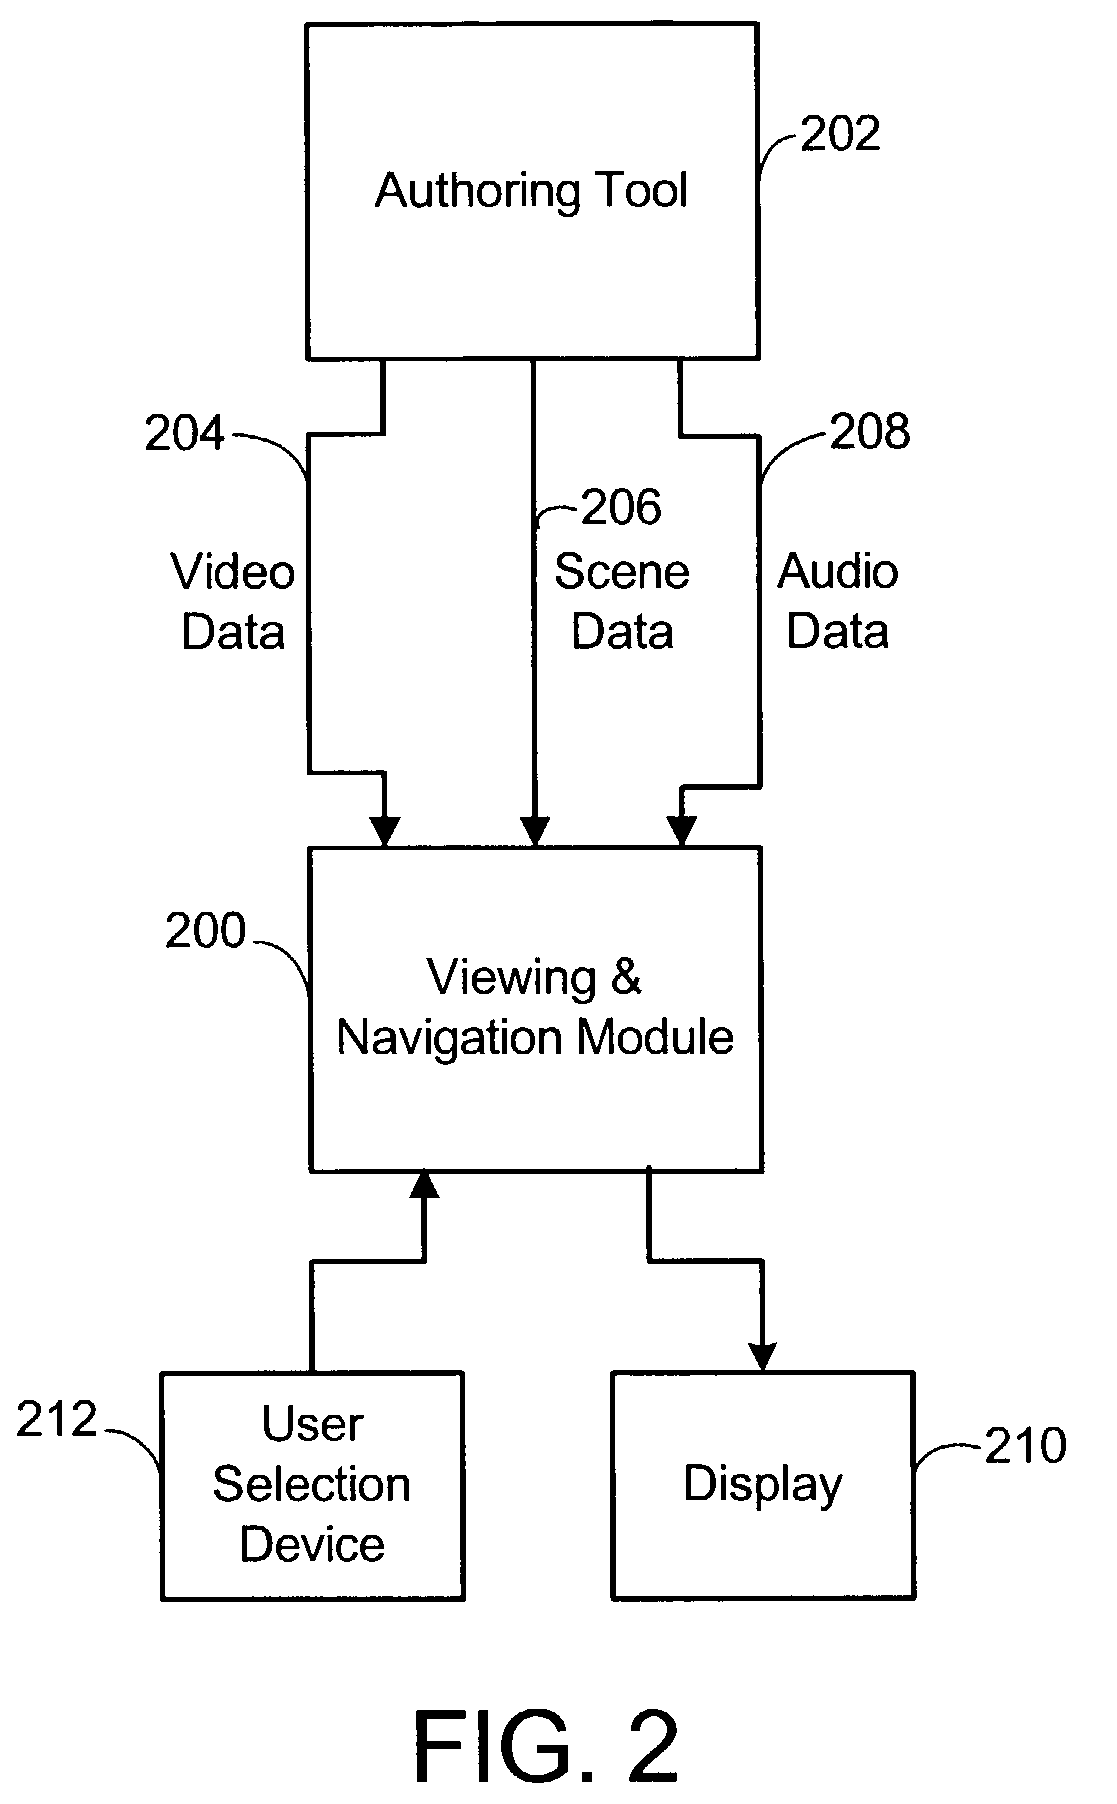 System and process for viewing and navigating through an interactive video tour